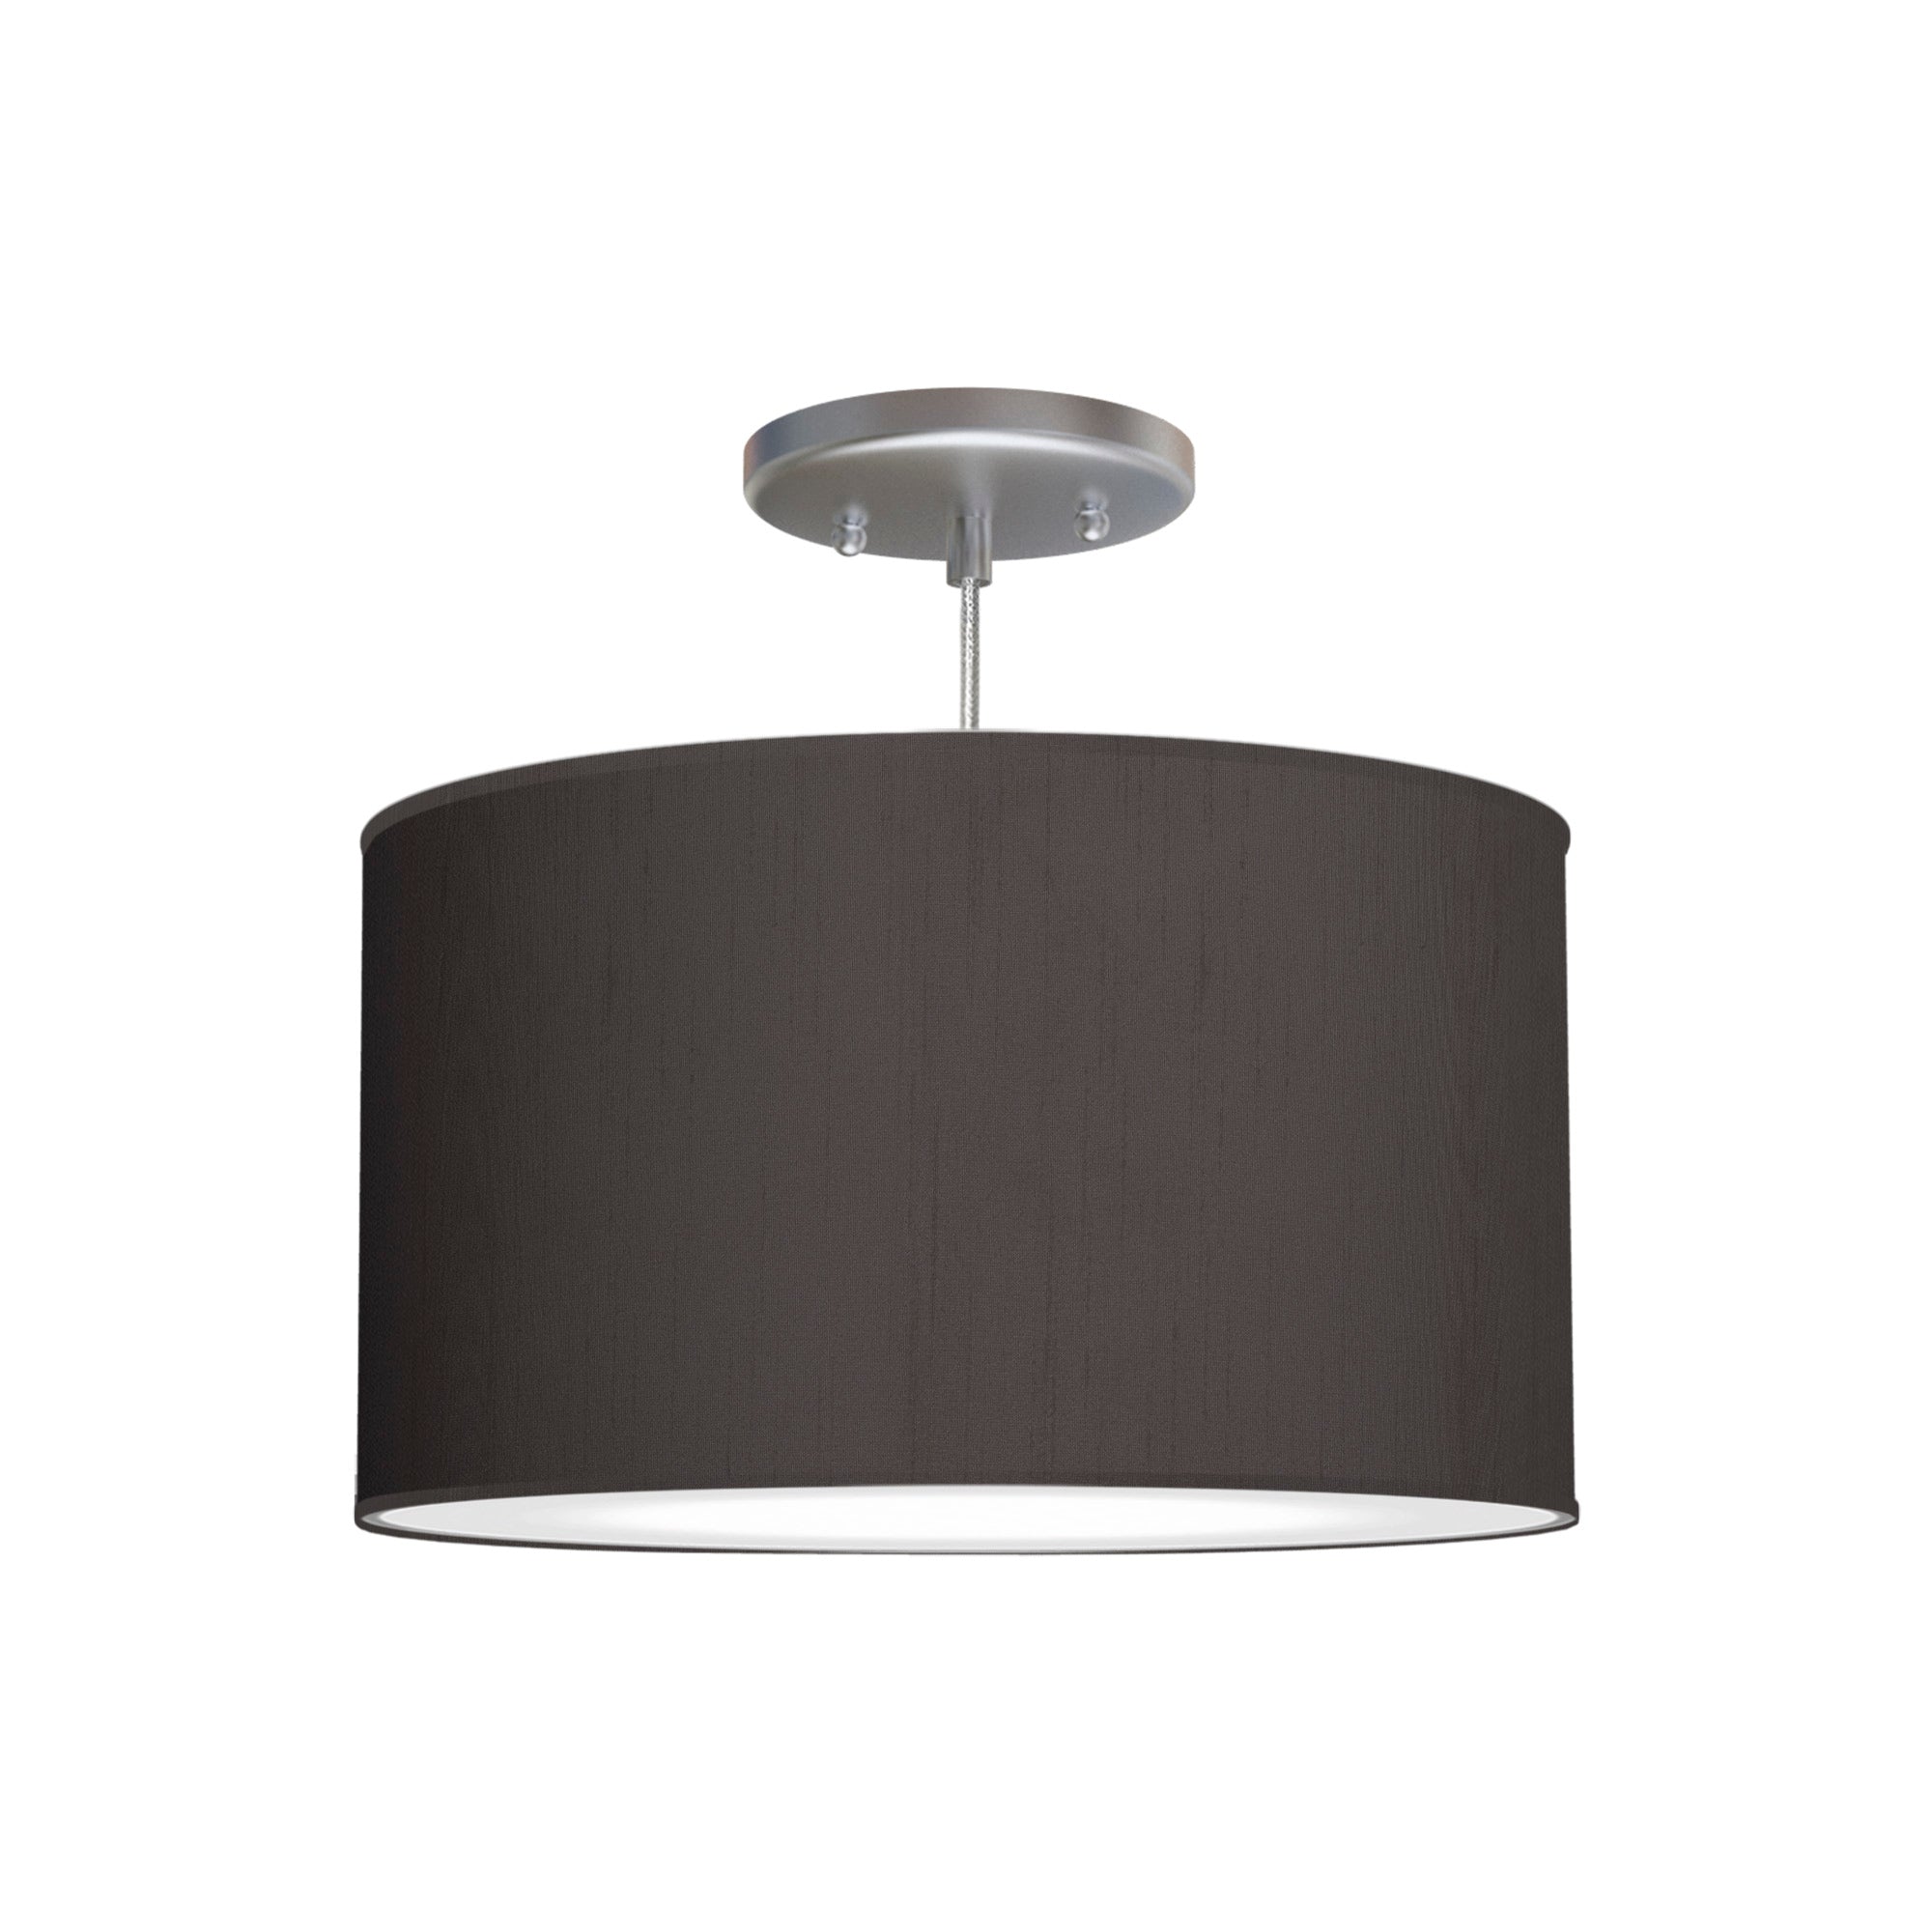 The Gab Hanging Lamp from Seascape Fixtures with a silk shade in ebony color.